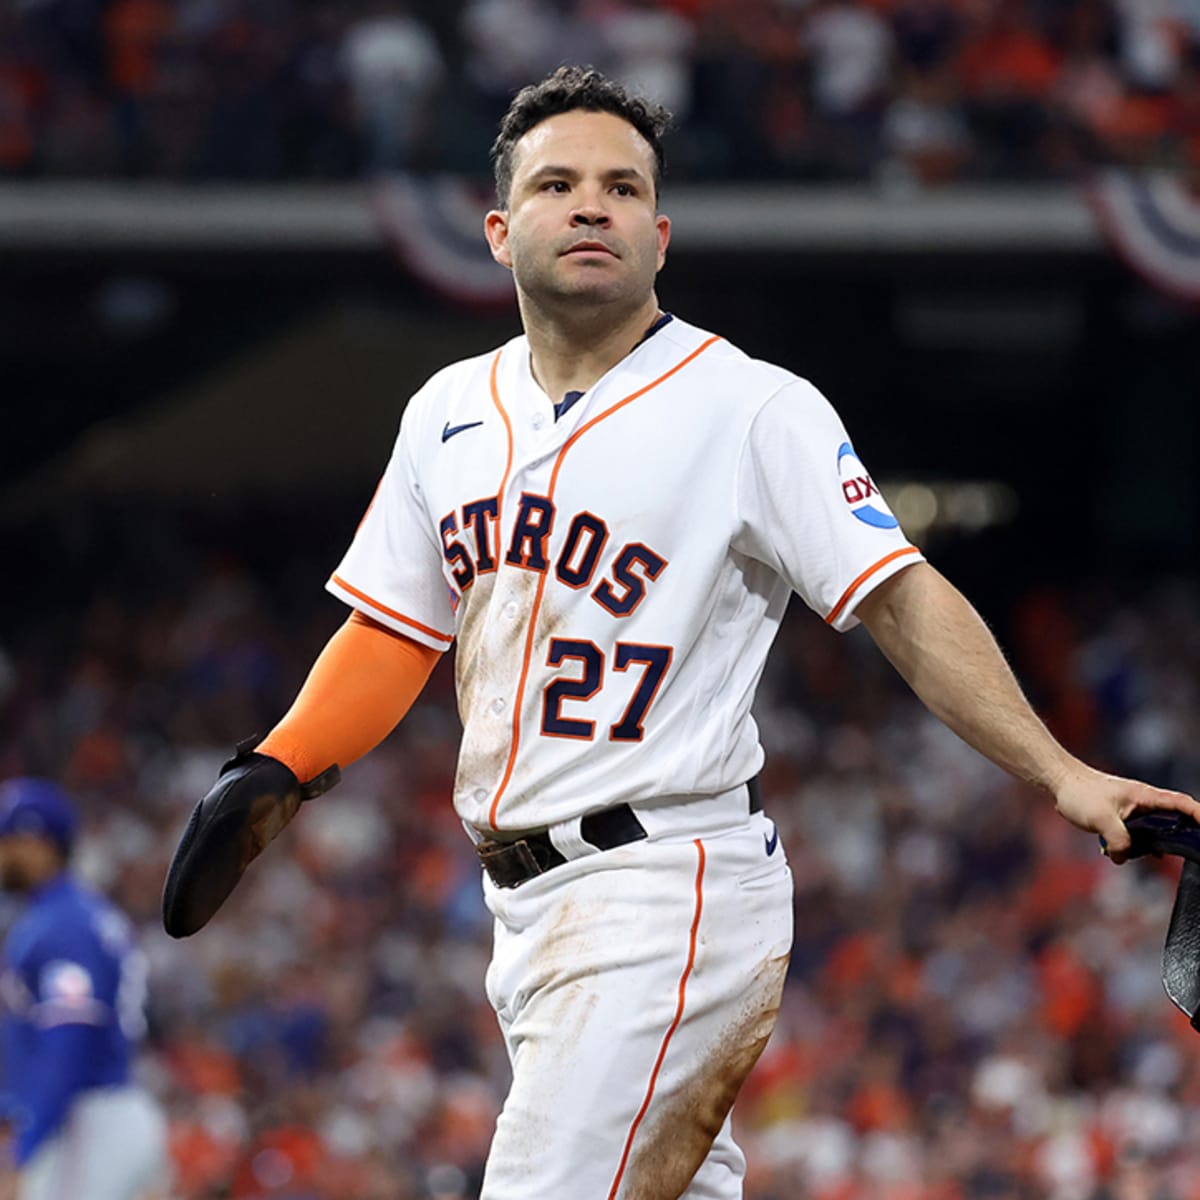 Know About Jose Altuve Wife, Nina, And Their Relationship